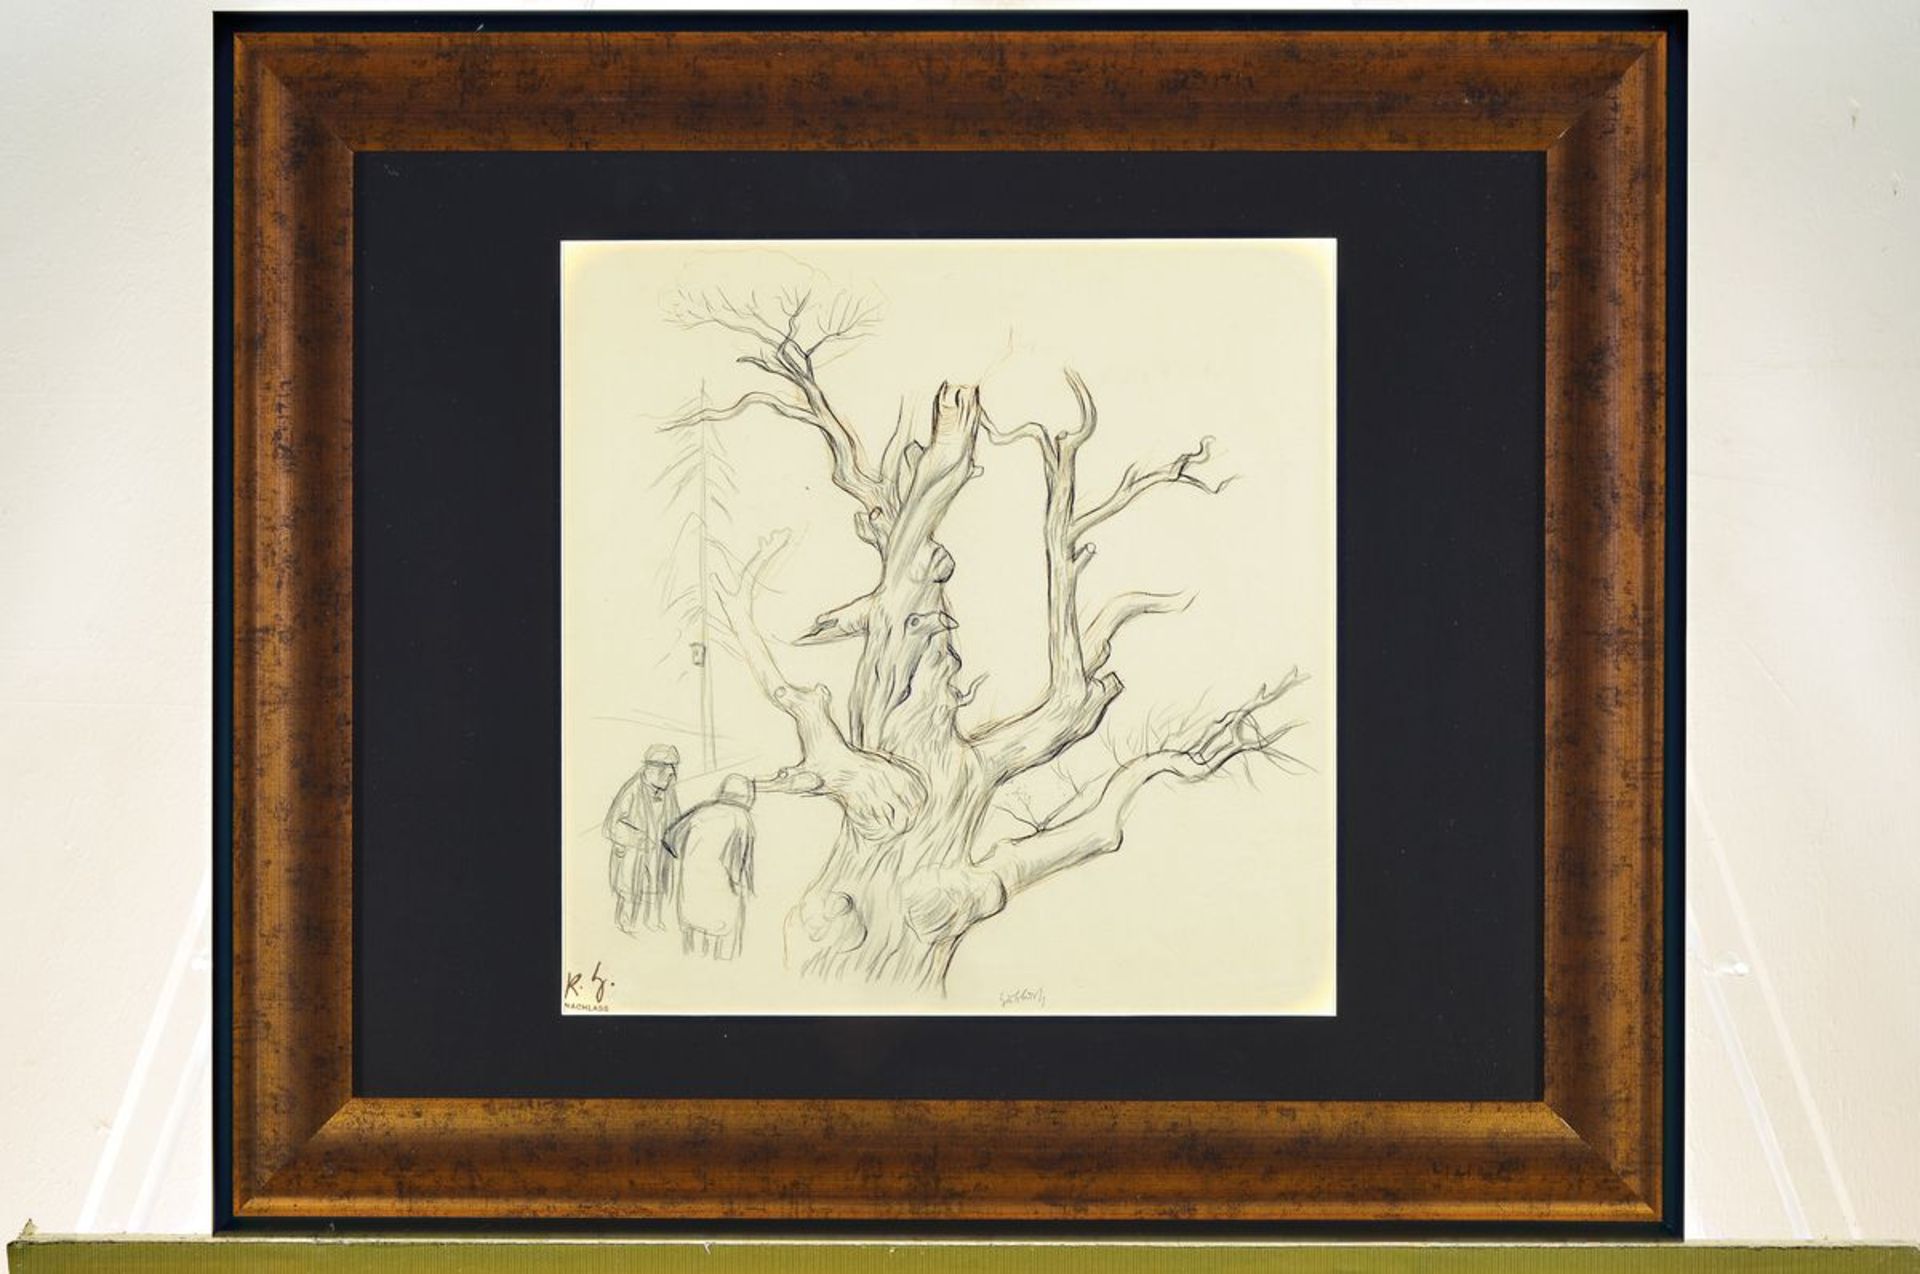 Karl Hubbuch, 1891 Karlsruhe - 1979, pencil drawing and brown Indian ink on chamoisfarbenem - Image 3 of 3